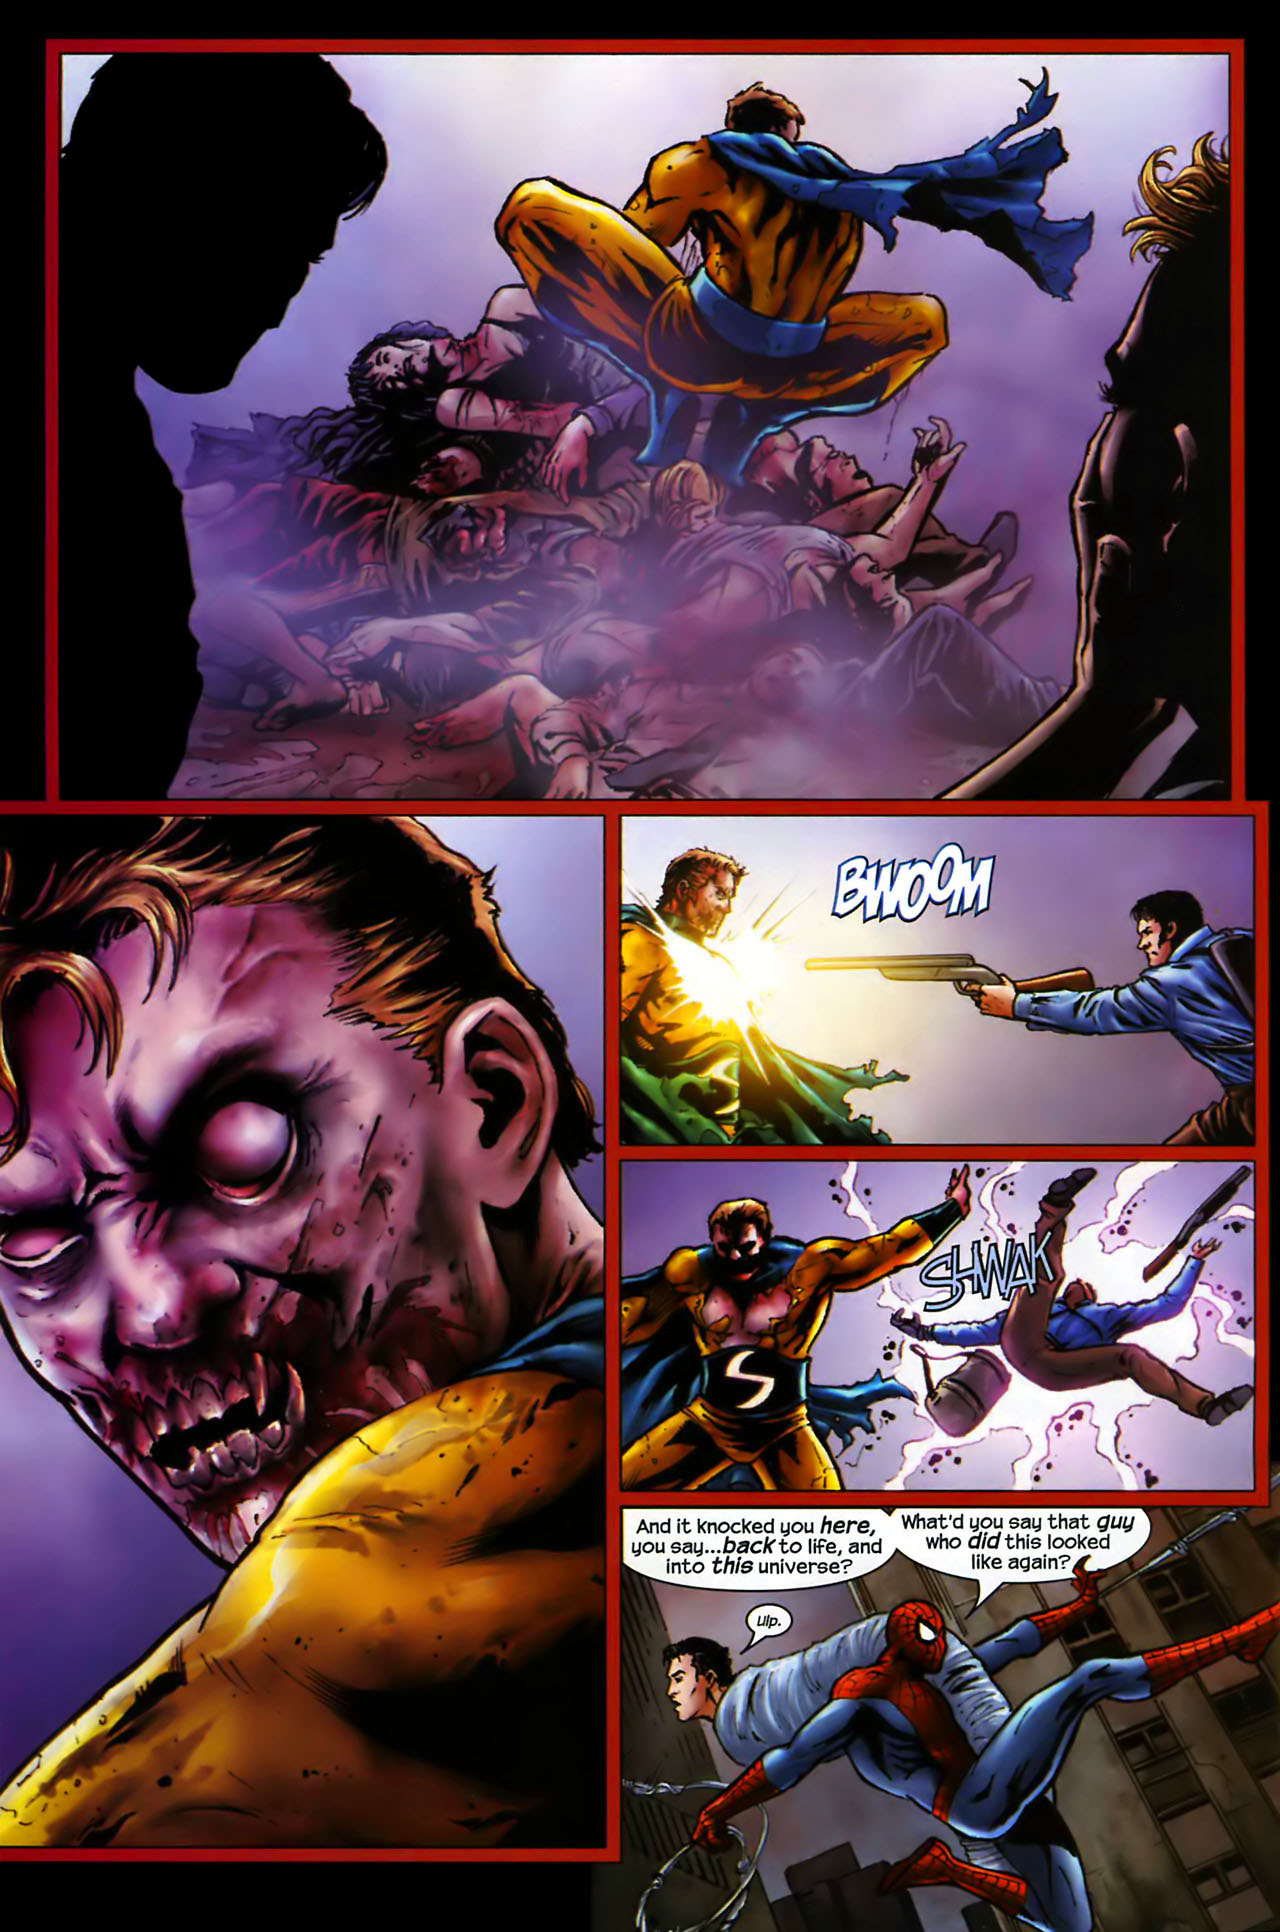 Marvel Zombies vs. Army of Darkness 1 of 5